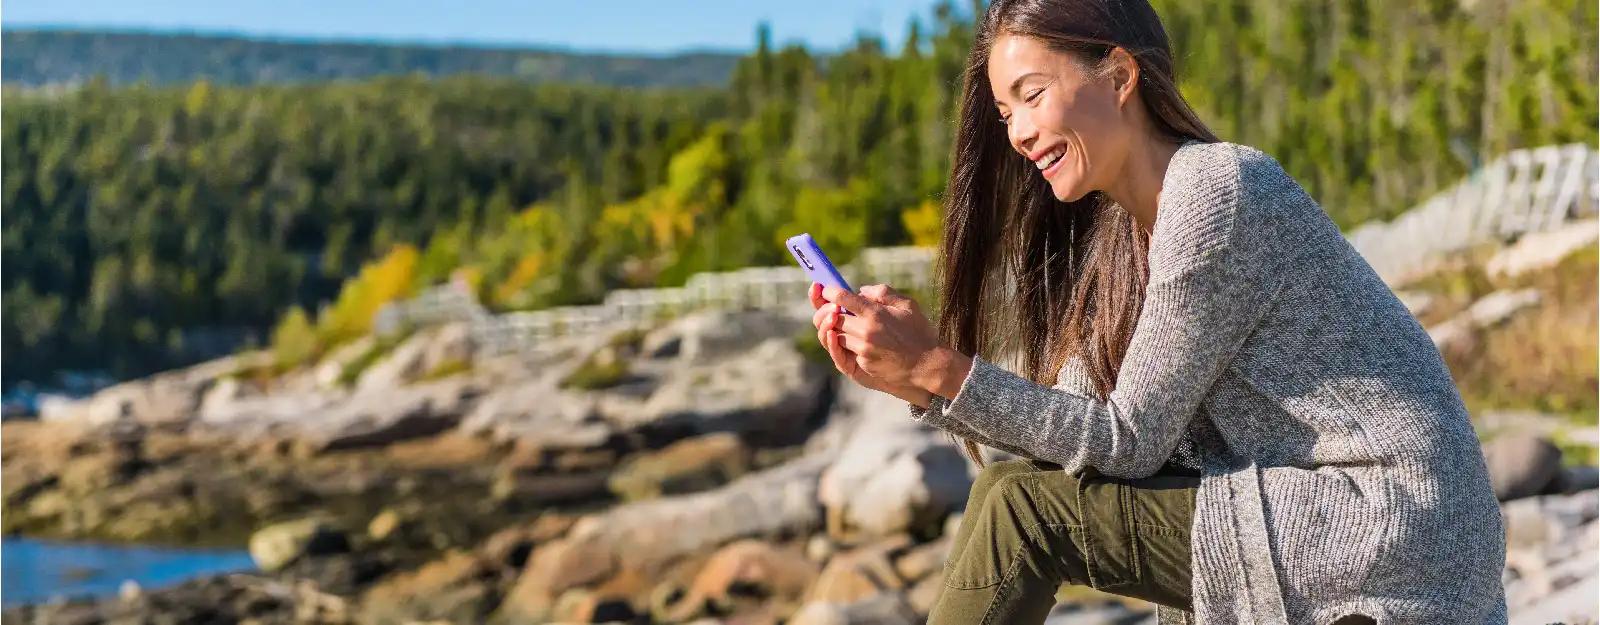 woman smiling at phone outdoors